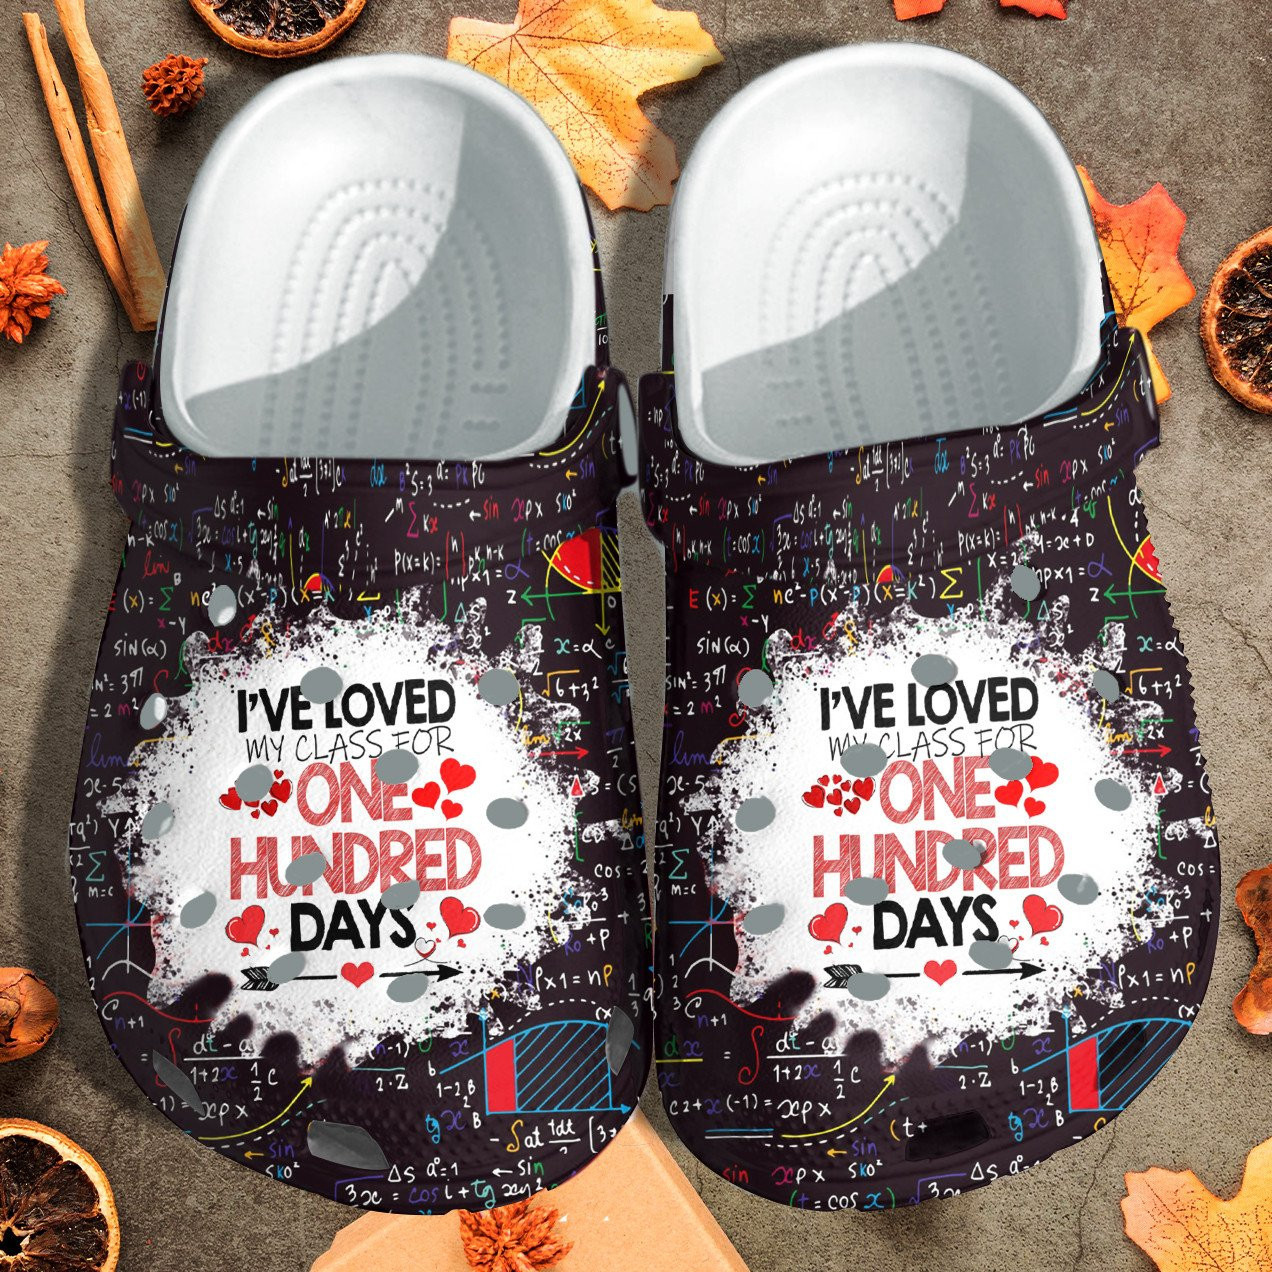 Ive Loved My Class For One Hundred Days Crocs Shoes Crocbland Clog Gift For Teacher Student